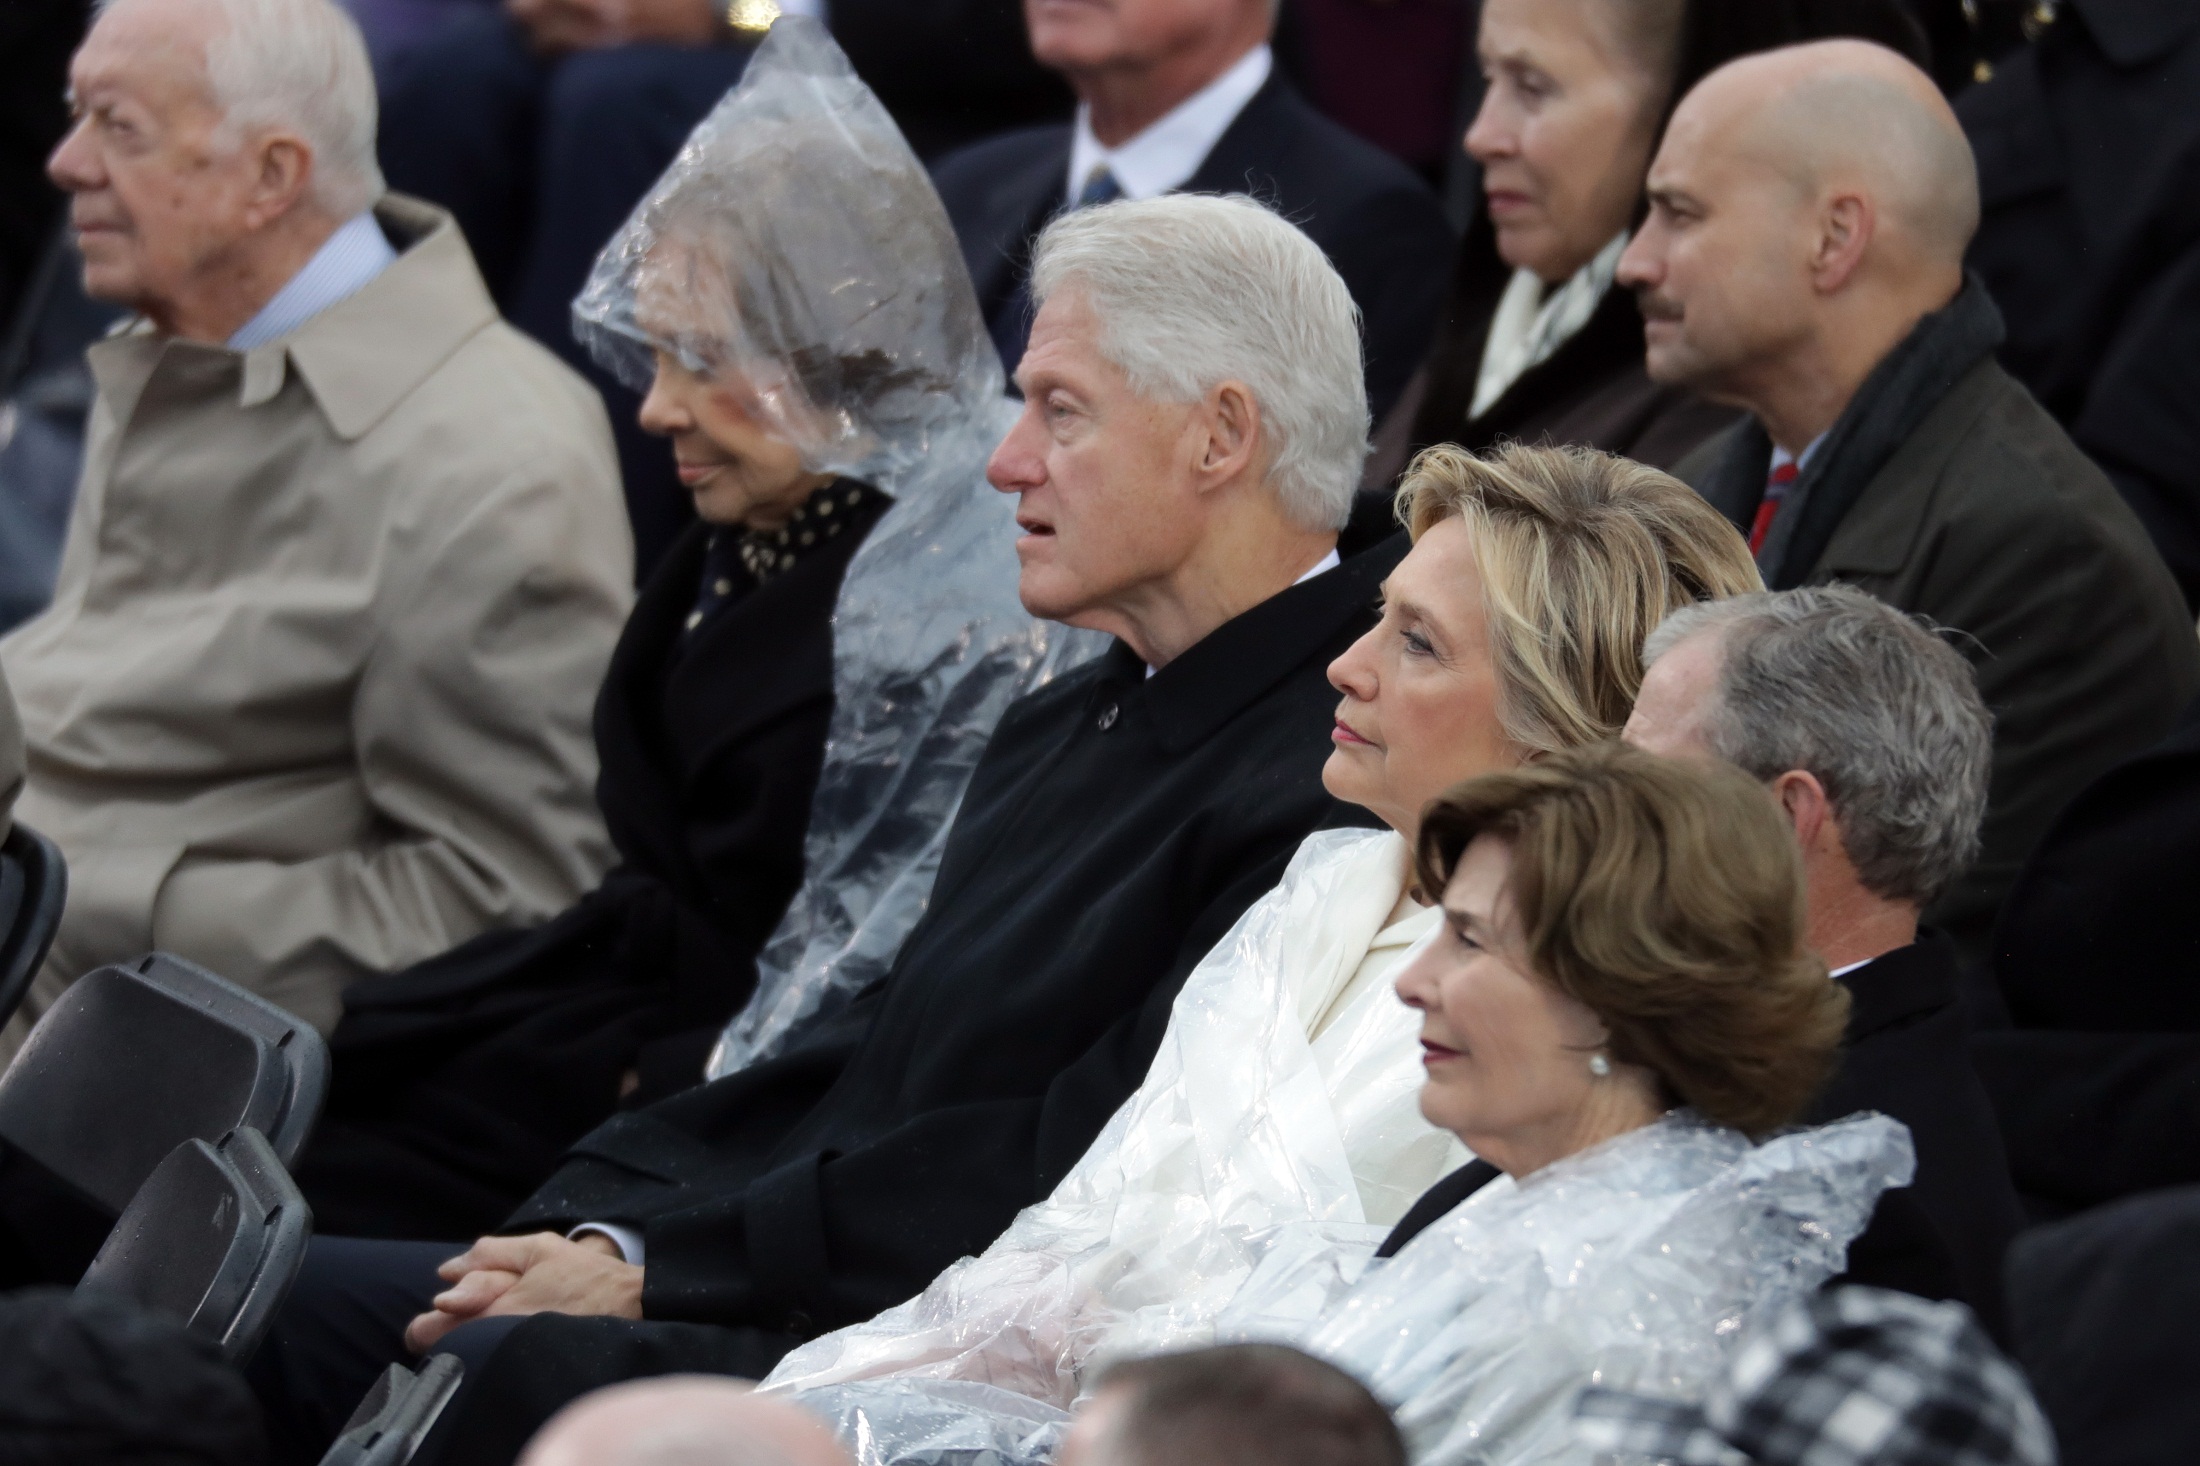 WASHINGTON, DC - JANUARY 20: (L-R) Former President Jimmy Carter, former first lady Rosalynn Carter, former President Bill Clinton, former Democratic presidential nominee Hillary Clinton, former President George W. Bush and former first lady Laura Bush watch President Donald Trump's inaugural address on the West Front of the U.S. Capitol on January 20, 2017 in Washington, DC. In today's inauguration ceremony Donald J. Trump becomes the 45th president of the United States.   Chip Somodevilla/Getty Images/AFP